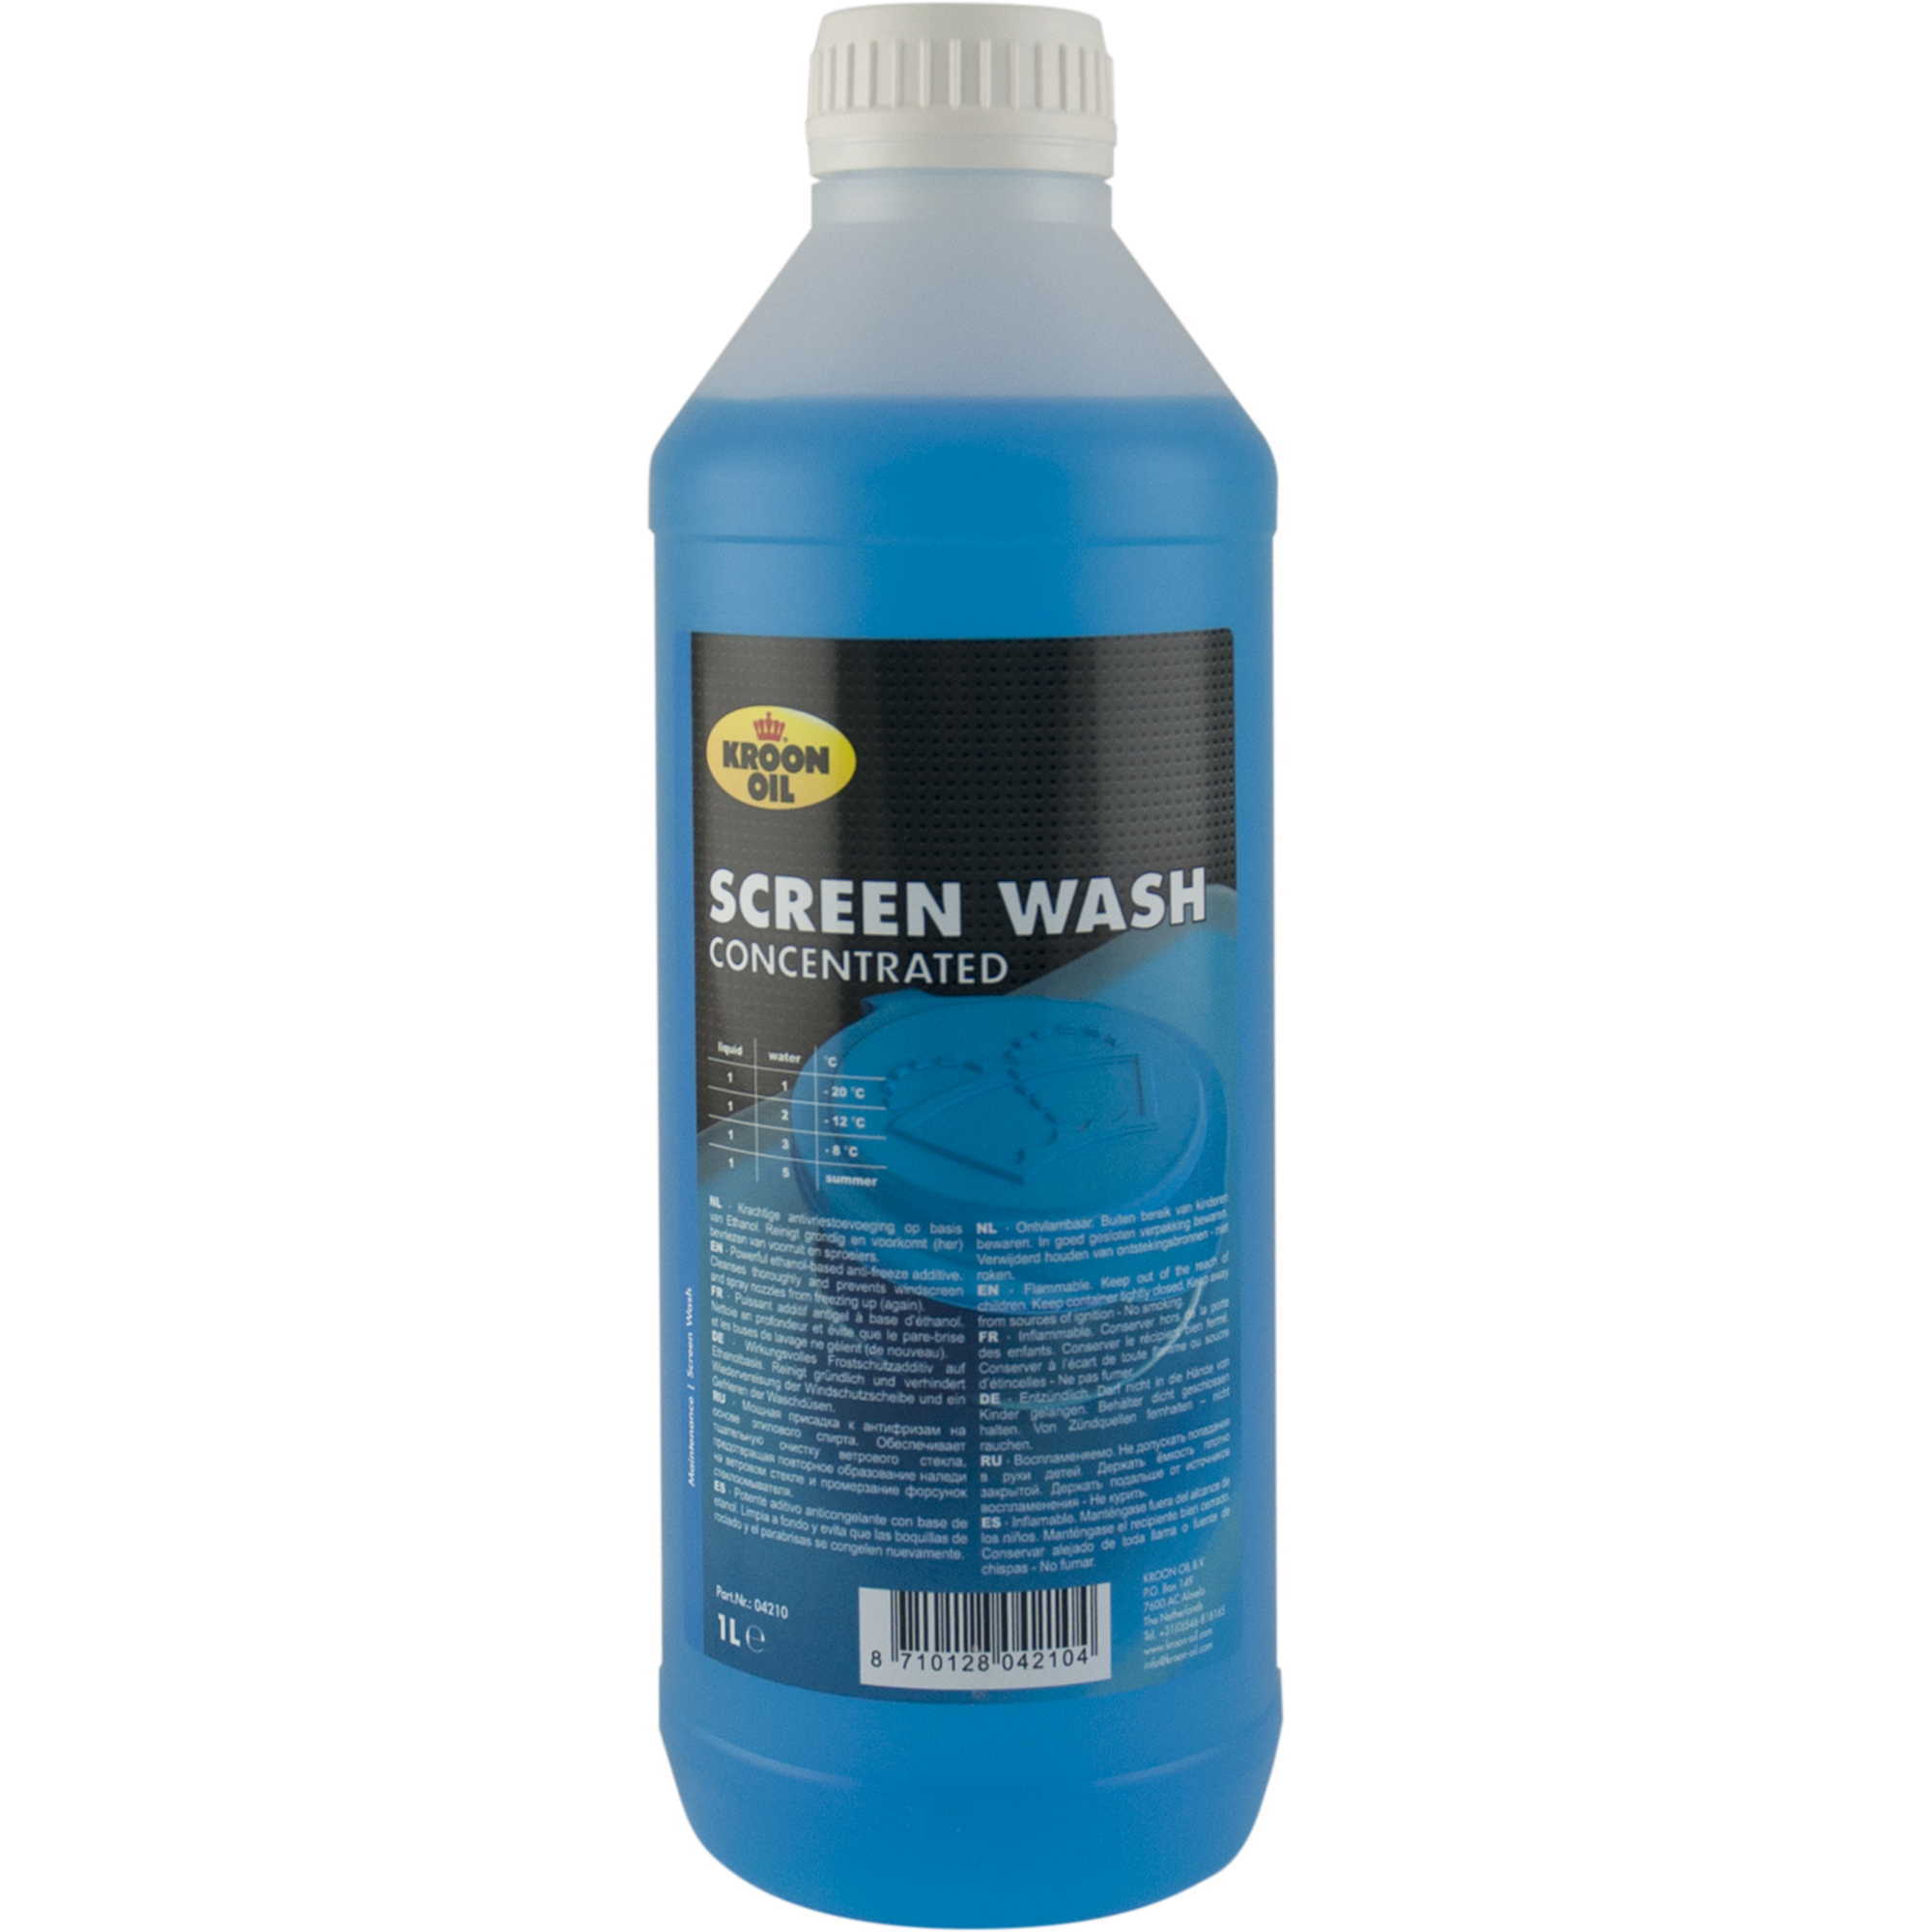 Kroon-Oil Screen Wash Concentrated, 1 lt